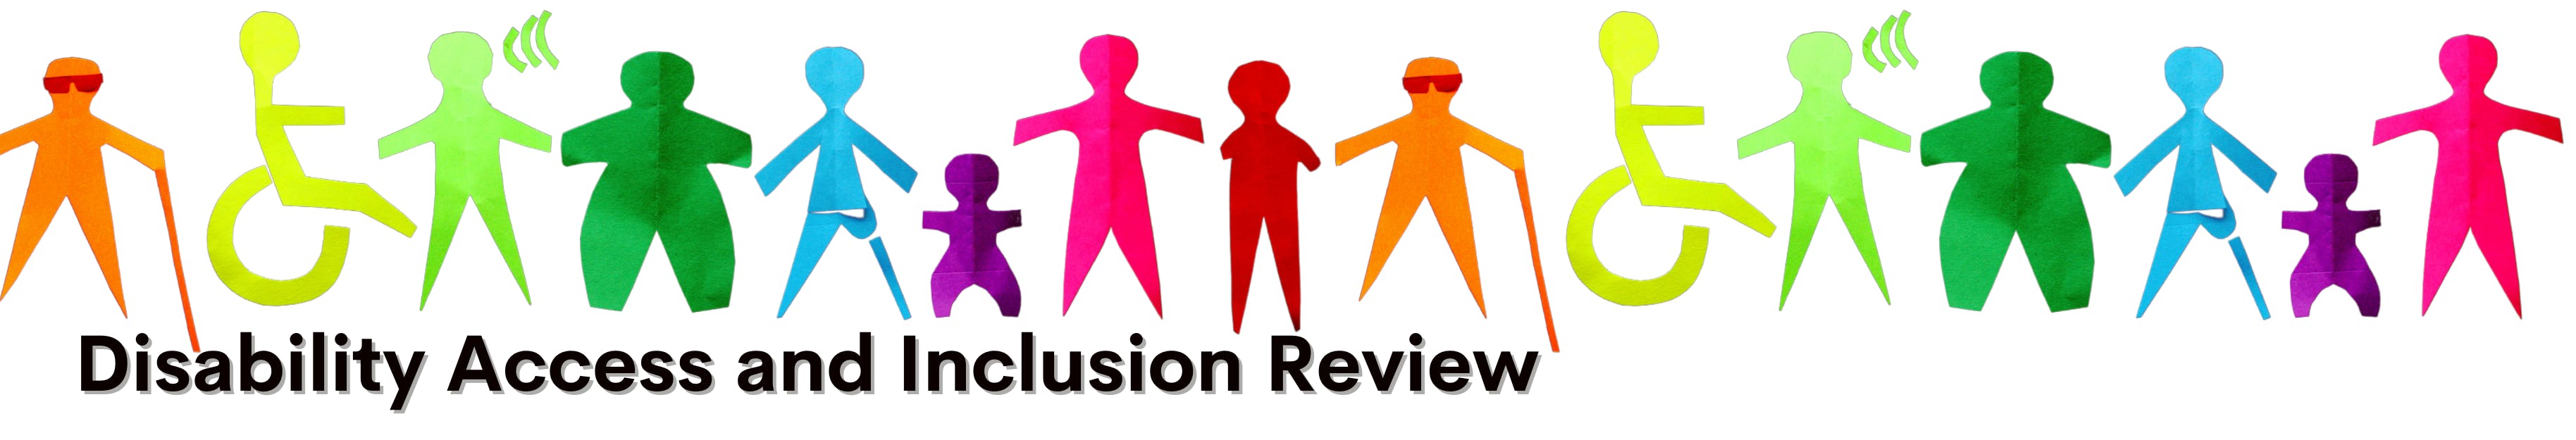 Words 'Disability Access and Inclusion Review' on a white background with coloured graphics of people with diverse abilities